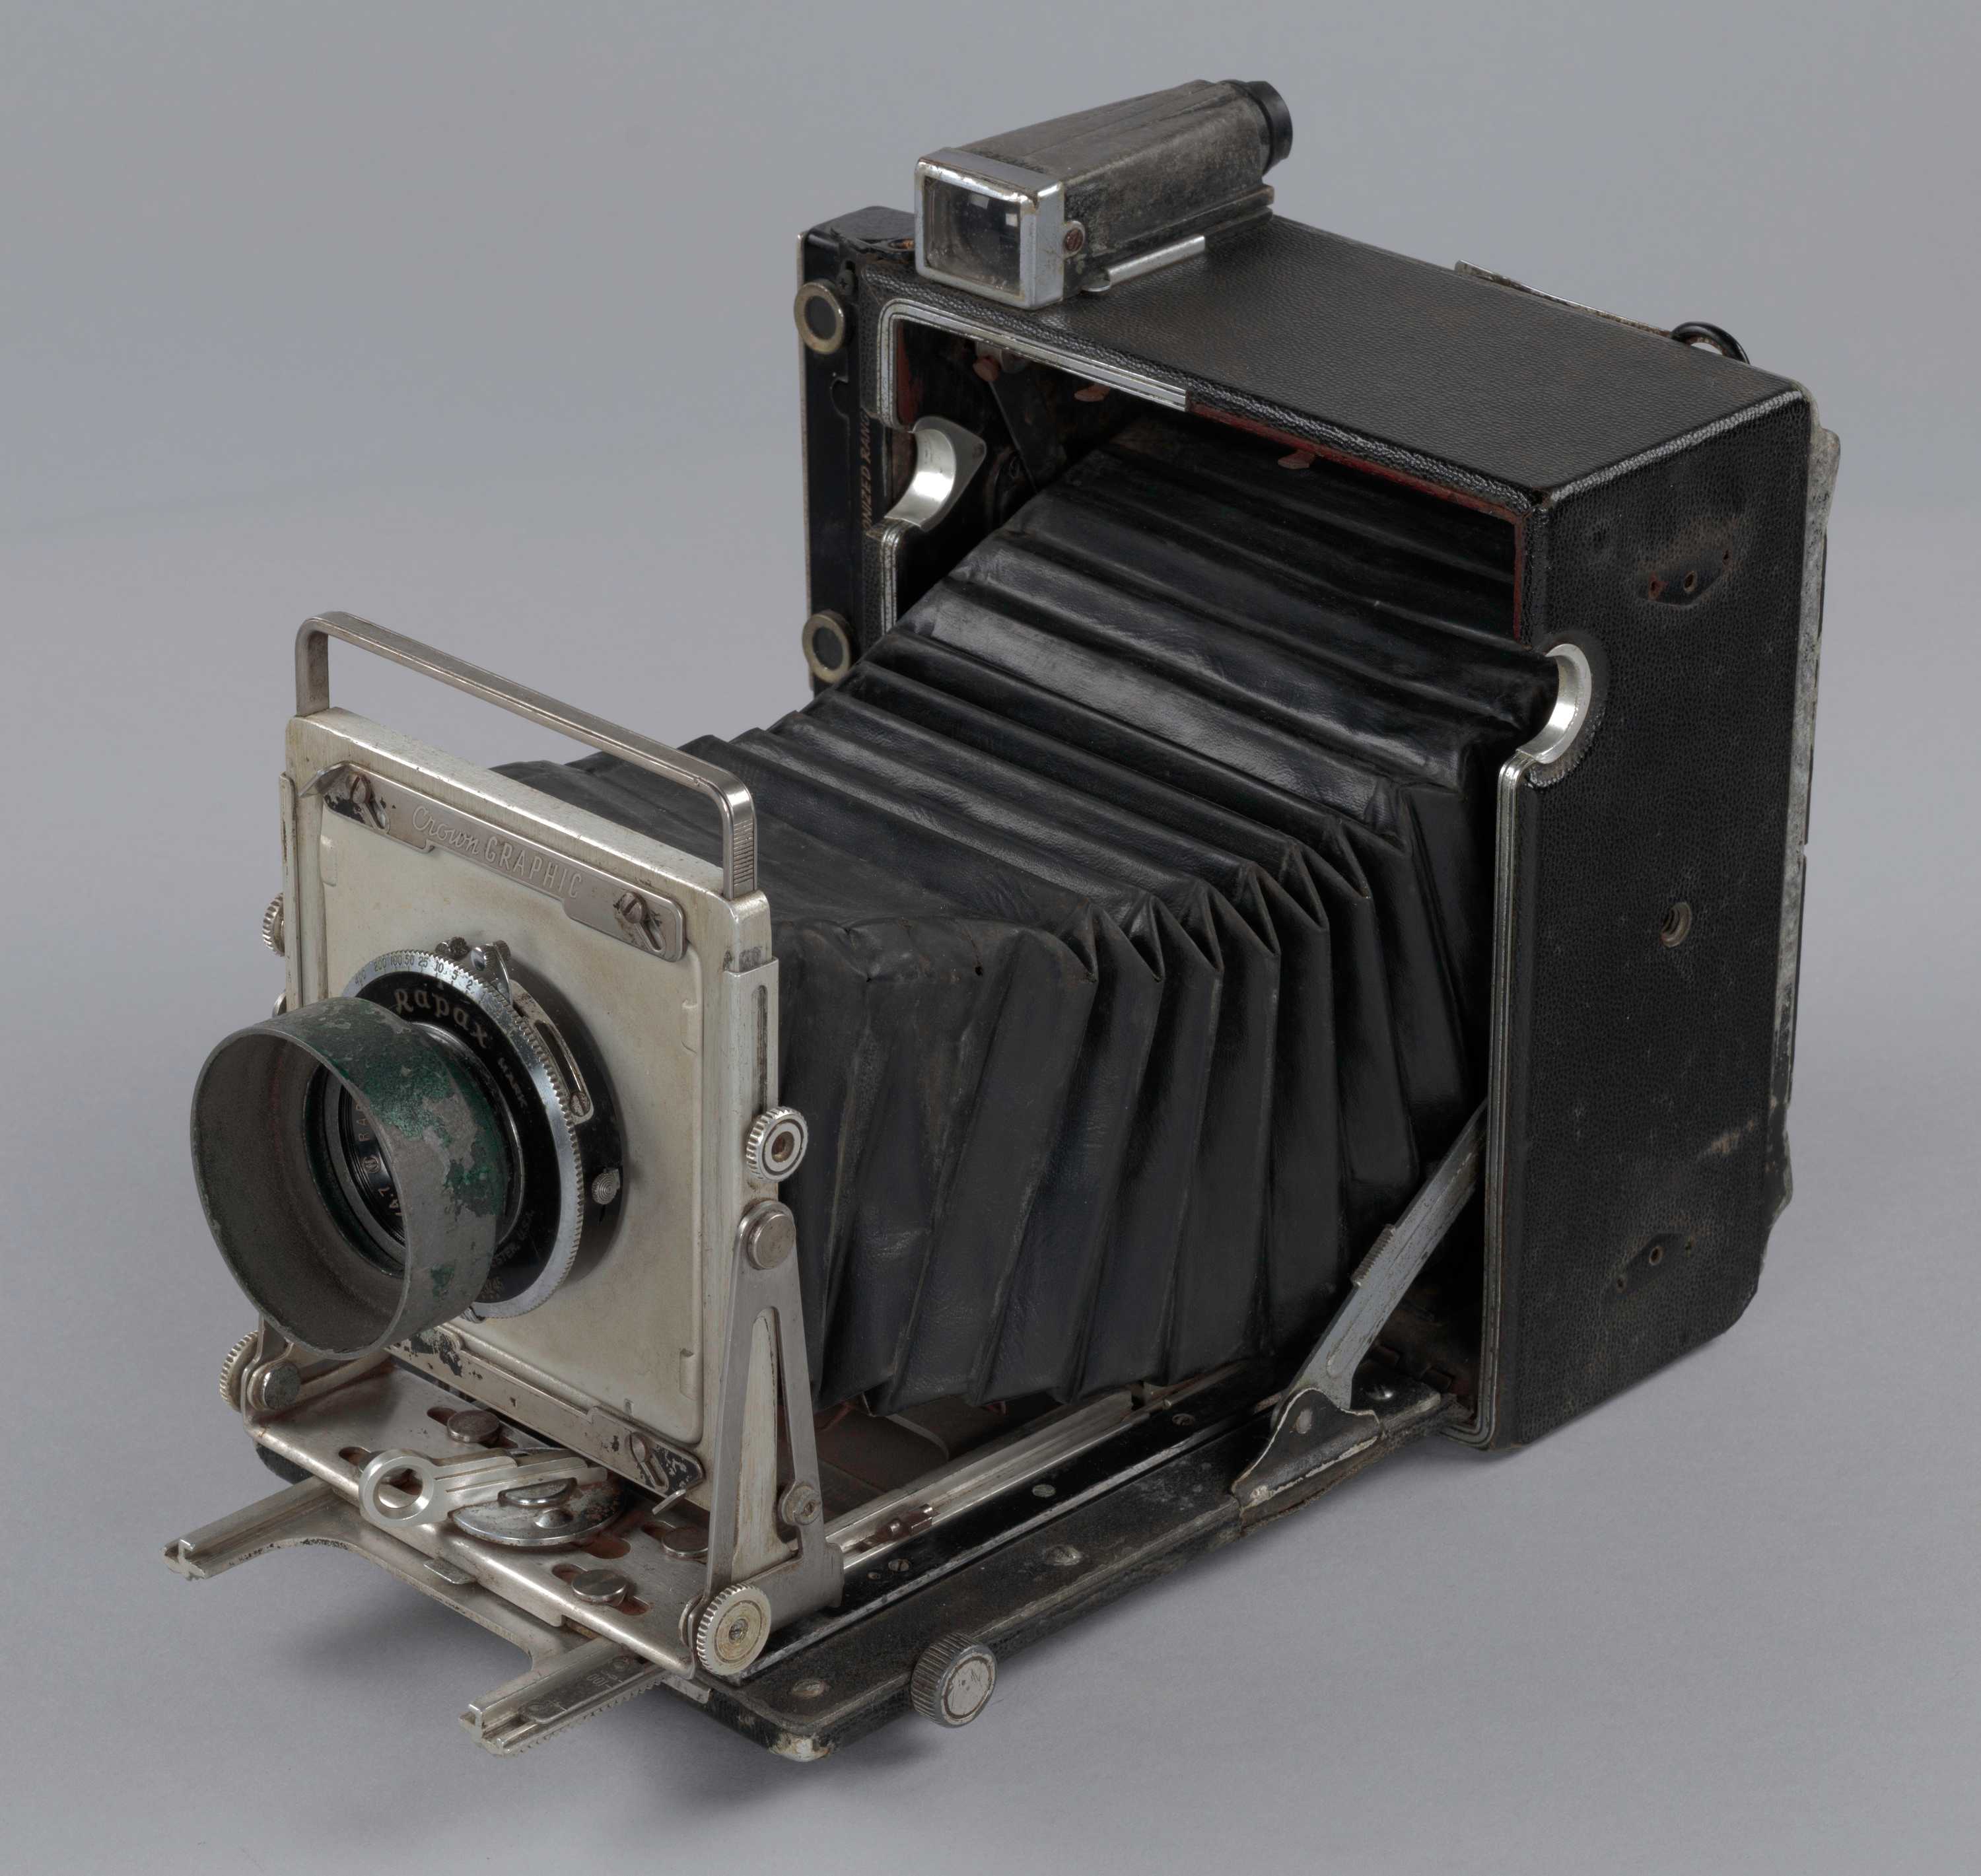 This Pacemaker 34 Crown Graphic camera is an open and extended field camera.